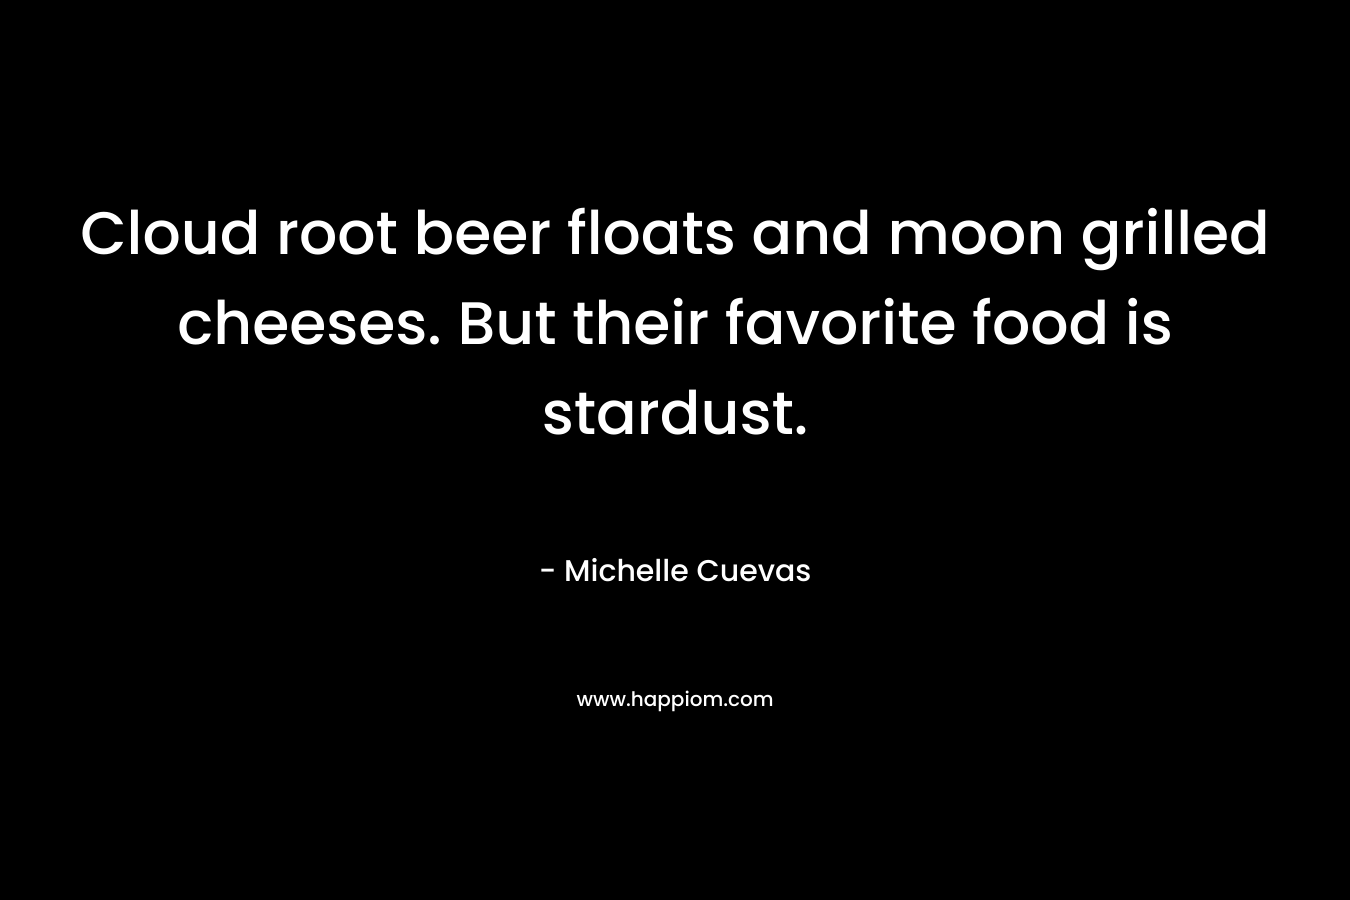 Cloud root beer floats and moon grilled cheeses. But their favorite food is stardust. – Michelle Cuevas